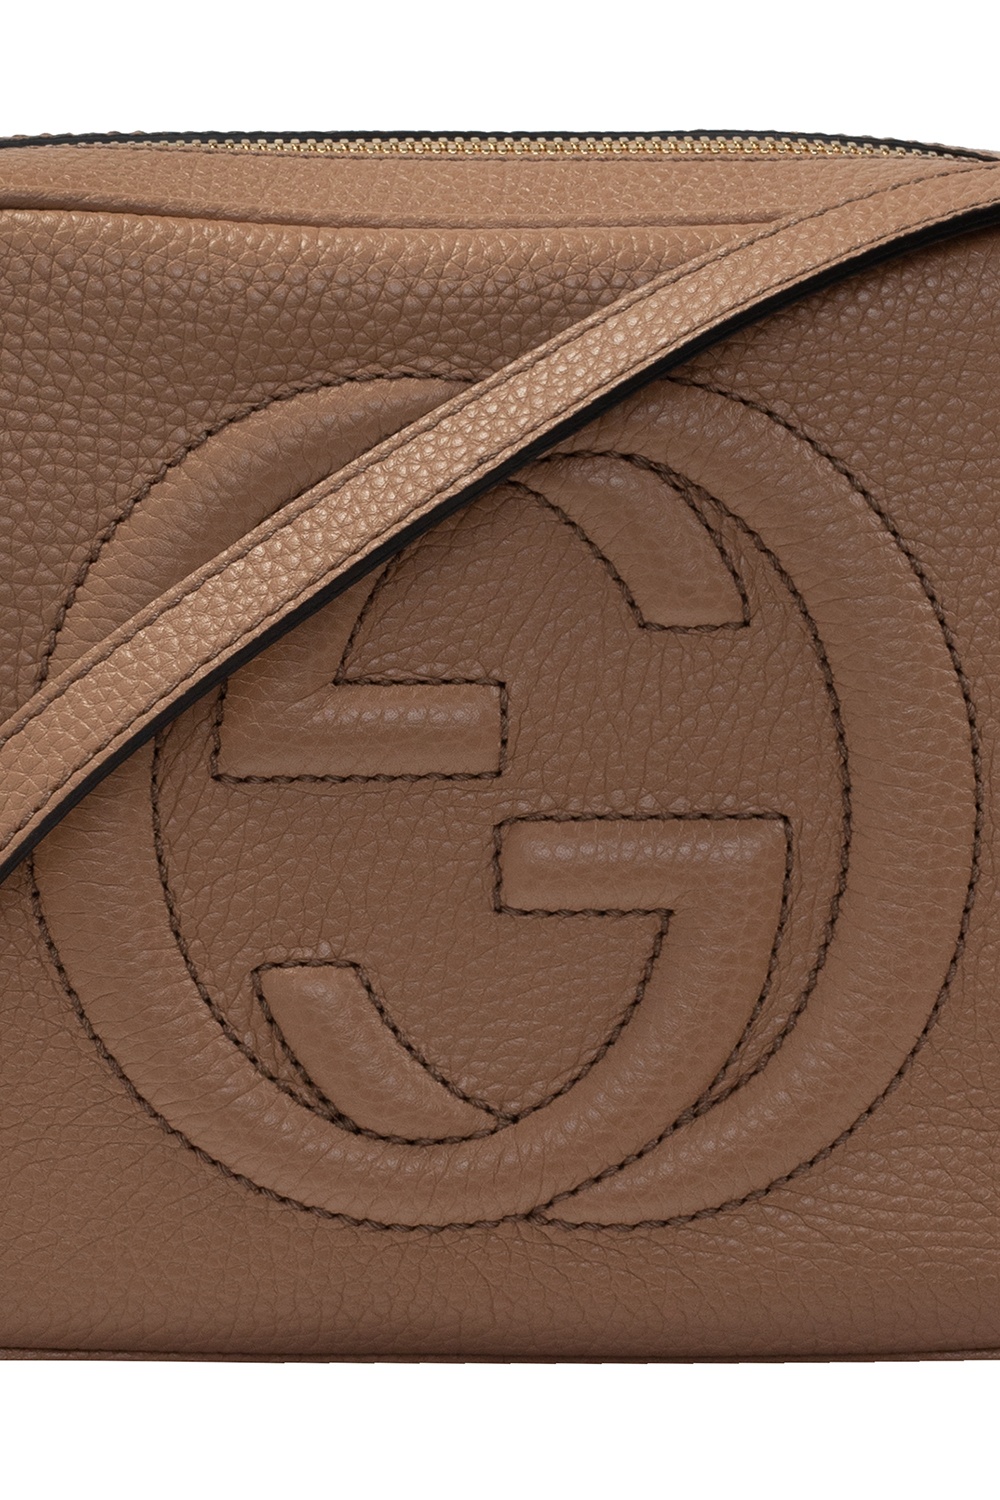 Gucci Soho Leather Disco Bag (Varied Colors)